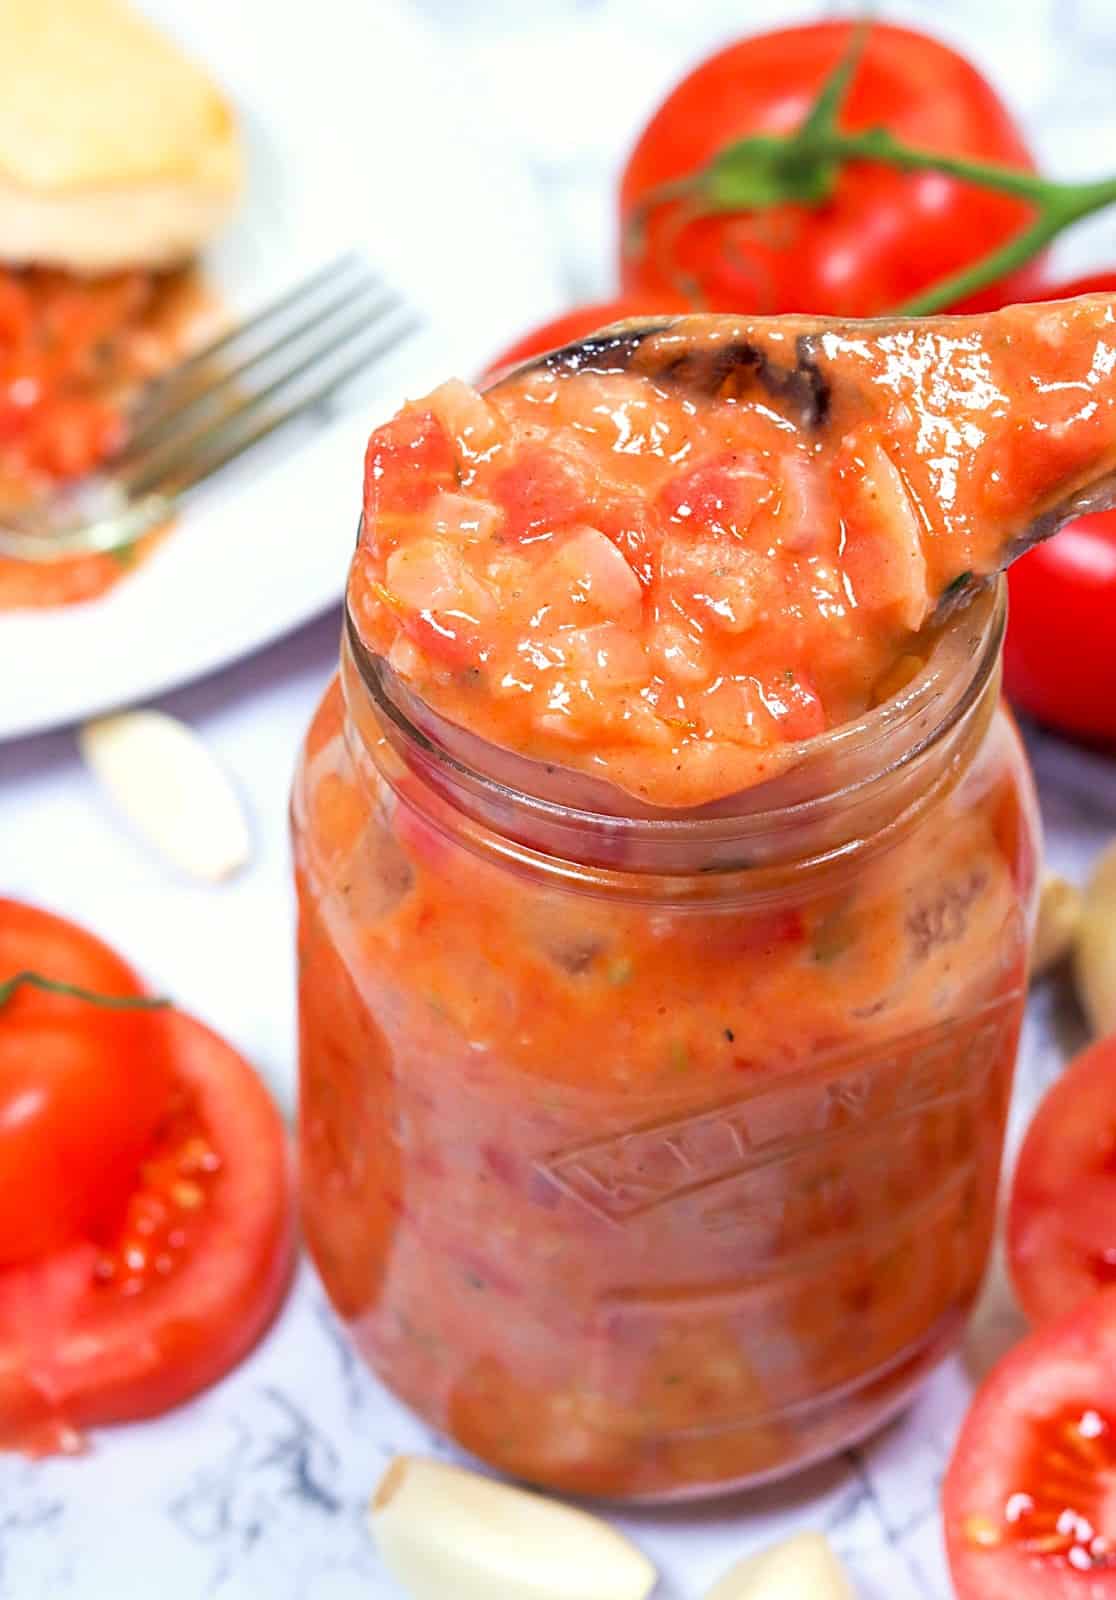 Tomato gravy in a jar ready for later. Super easy to make ahead and can.